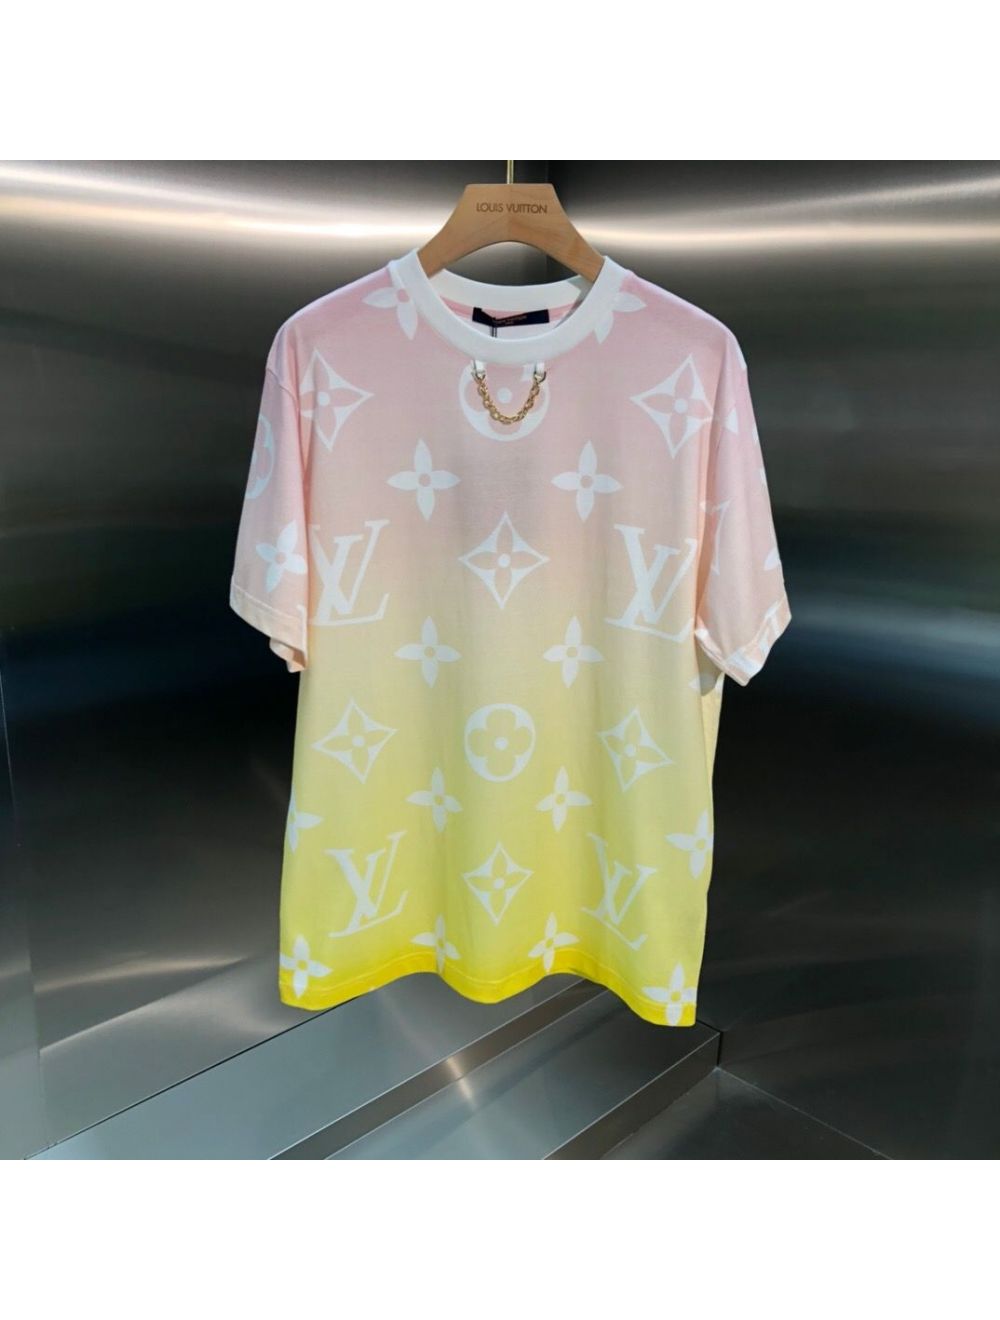 Louis Vuitton launches see-through T-shirt for a staggering £1,130